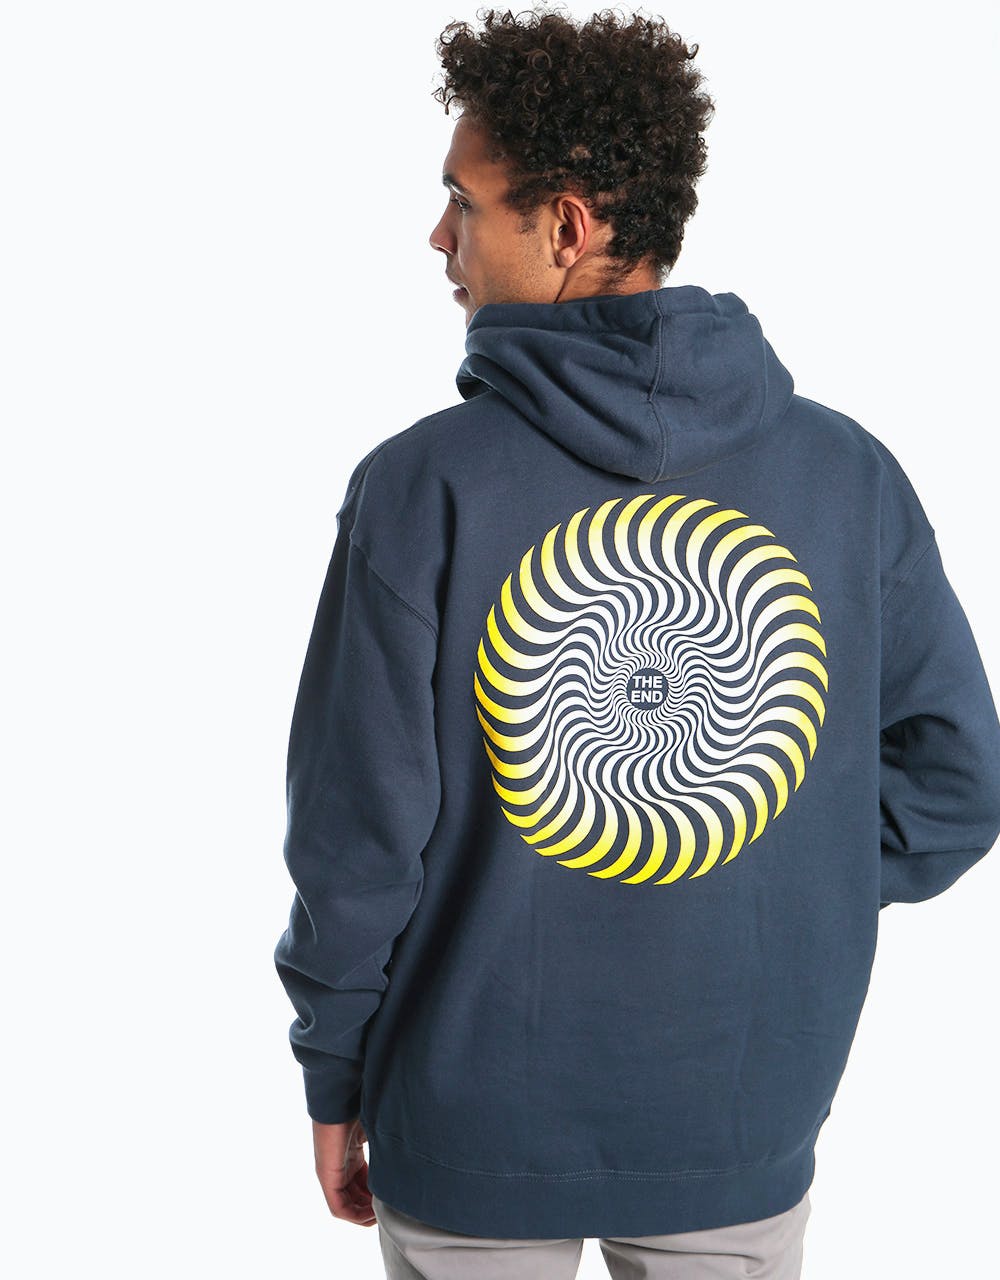 Spitfire Classic Swirl Fade Pullover Hoodie - Slate Blue/Yellow-White